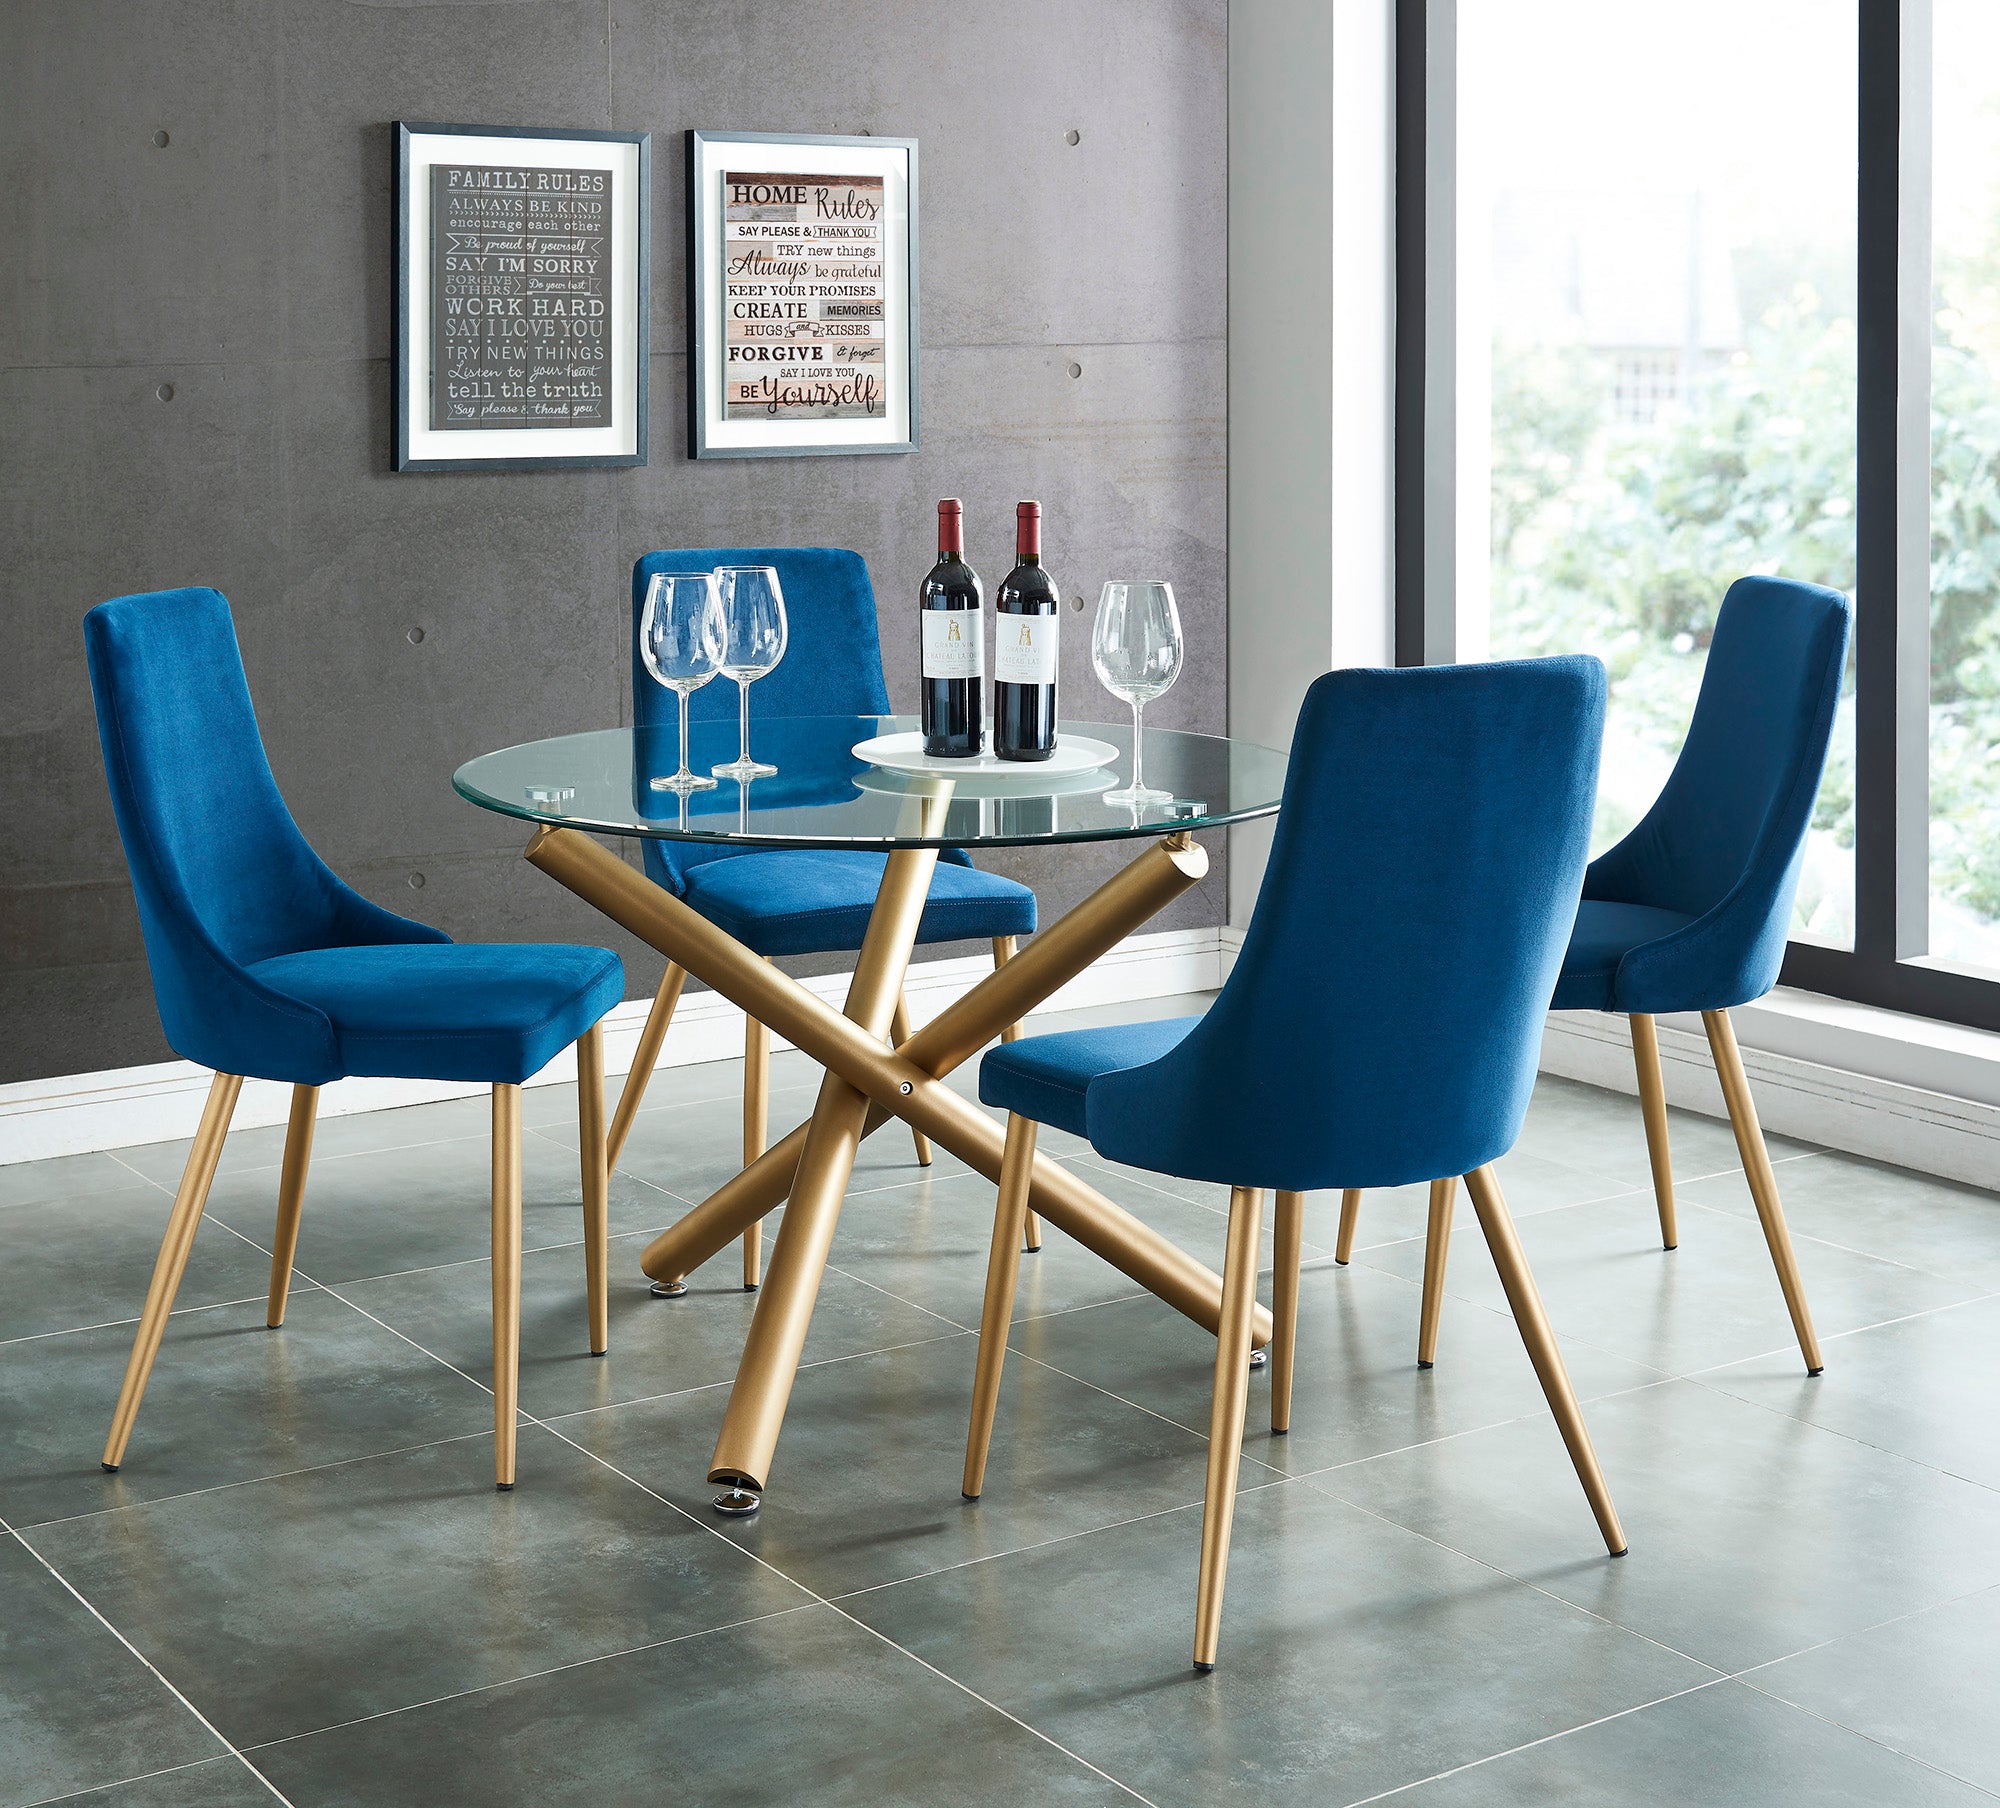 CARMILLA 40" ROUND GLASS TABLE WITH BLUE CHAIRS - 5PC DINING  SET